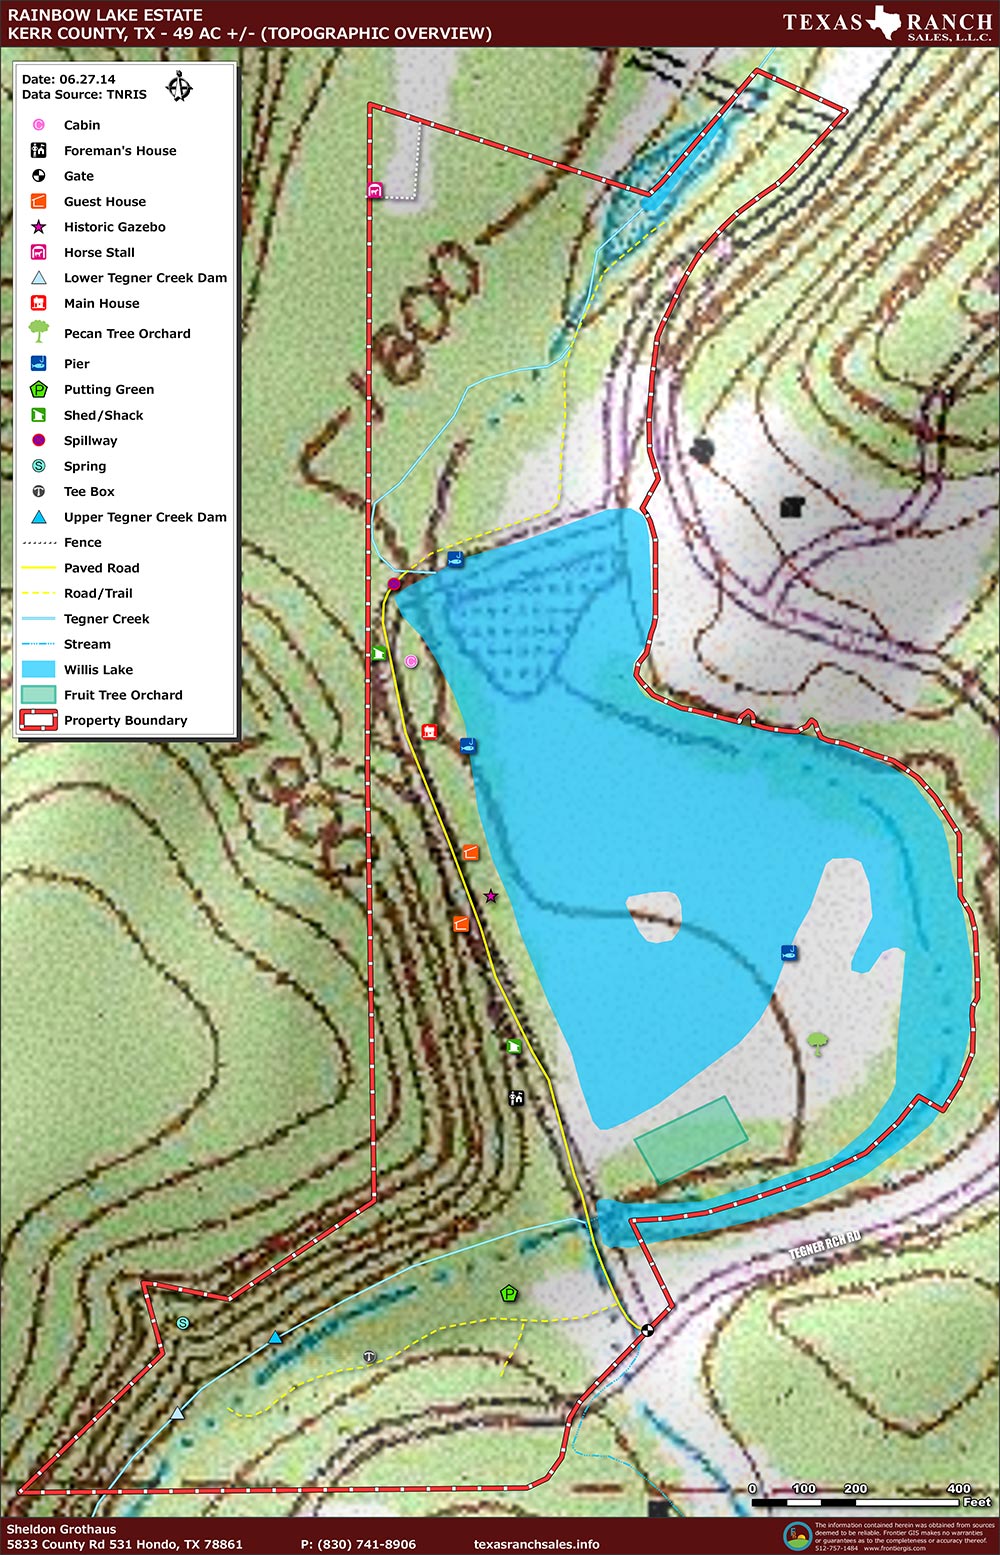 49.99 Acre Ranch Kerr Topography Map